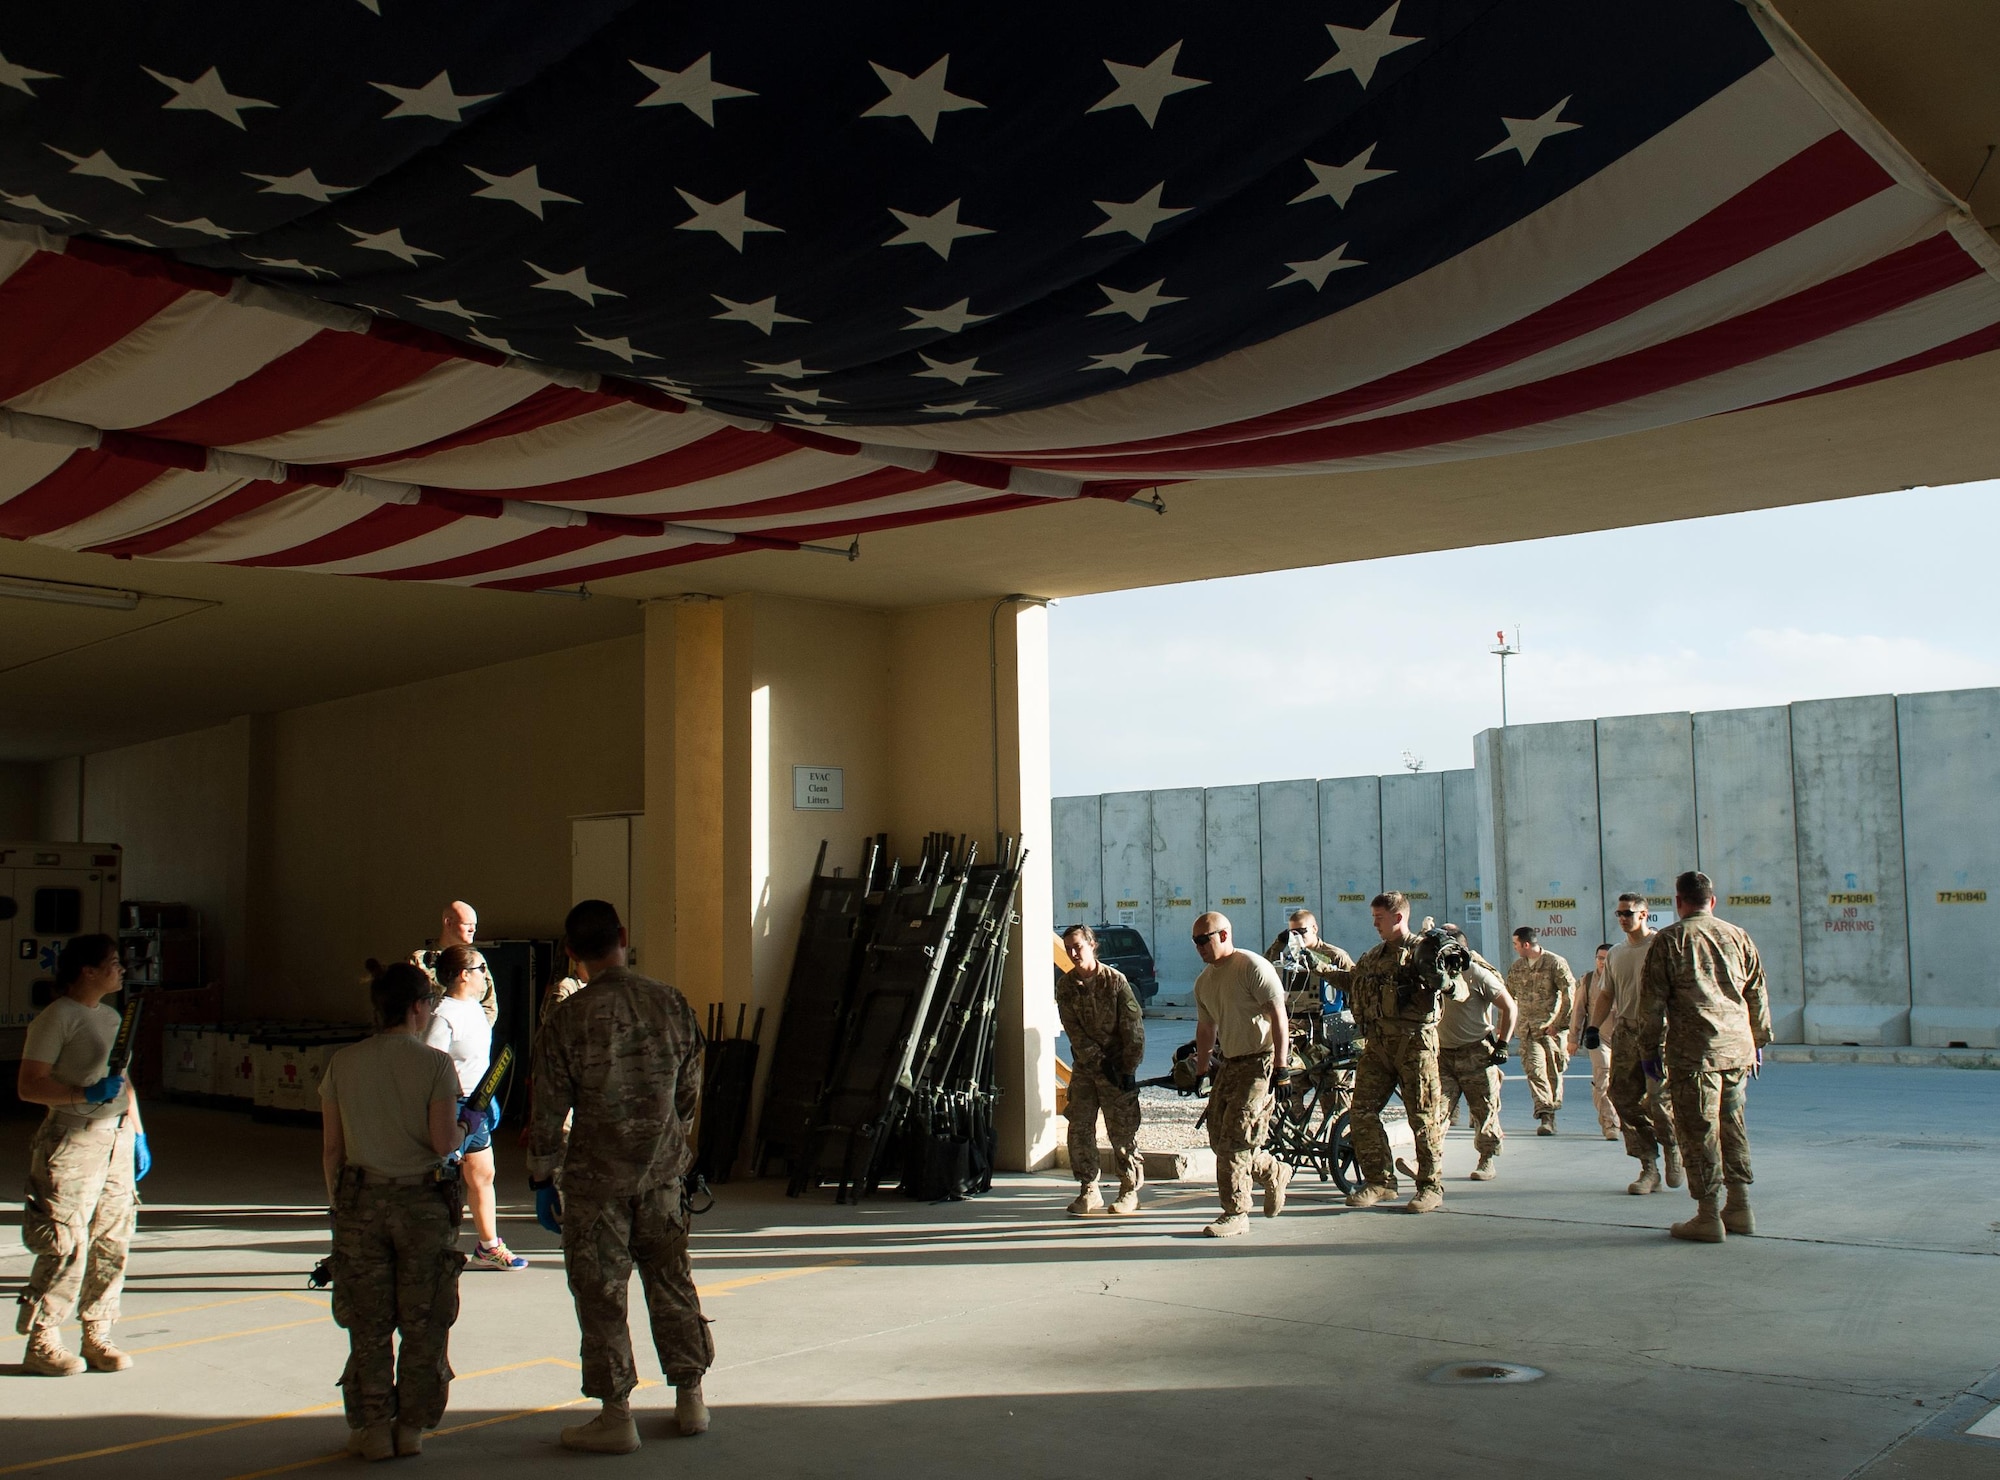 U.S. Airmen and Soldiers transport an injured Afghan National Defense and Security Forces soldier who sustained trauma from a gunshot to the Craig Joint Theater Hospital for surgery at Bagram Airfield Afghanistan, Sept. 26, 2015. The CJTH provides surgical capabilities in trauma, general surgery, orthopedics, neurosurgery, urology, vascular surgery and otolaryngology, all of which are critical to helping 98 percent of patients who come to the hospital survive their injuries. (U.S. Air Force photo by Tech. Sgt. Joseph Swafford/Released)